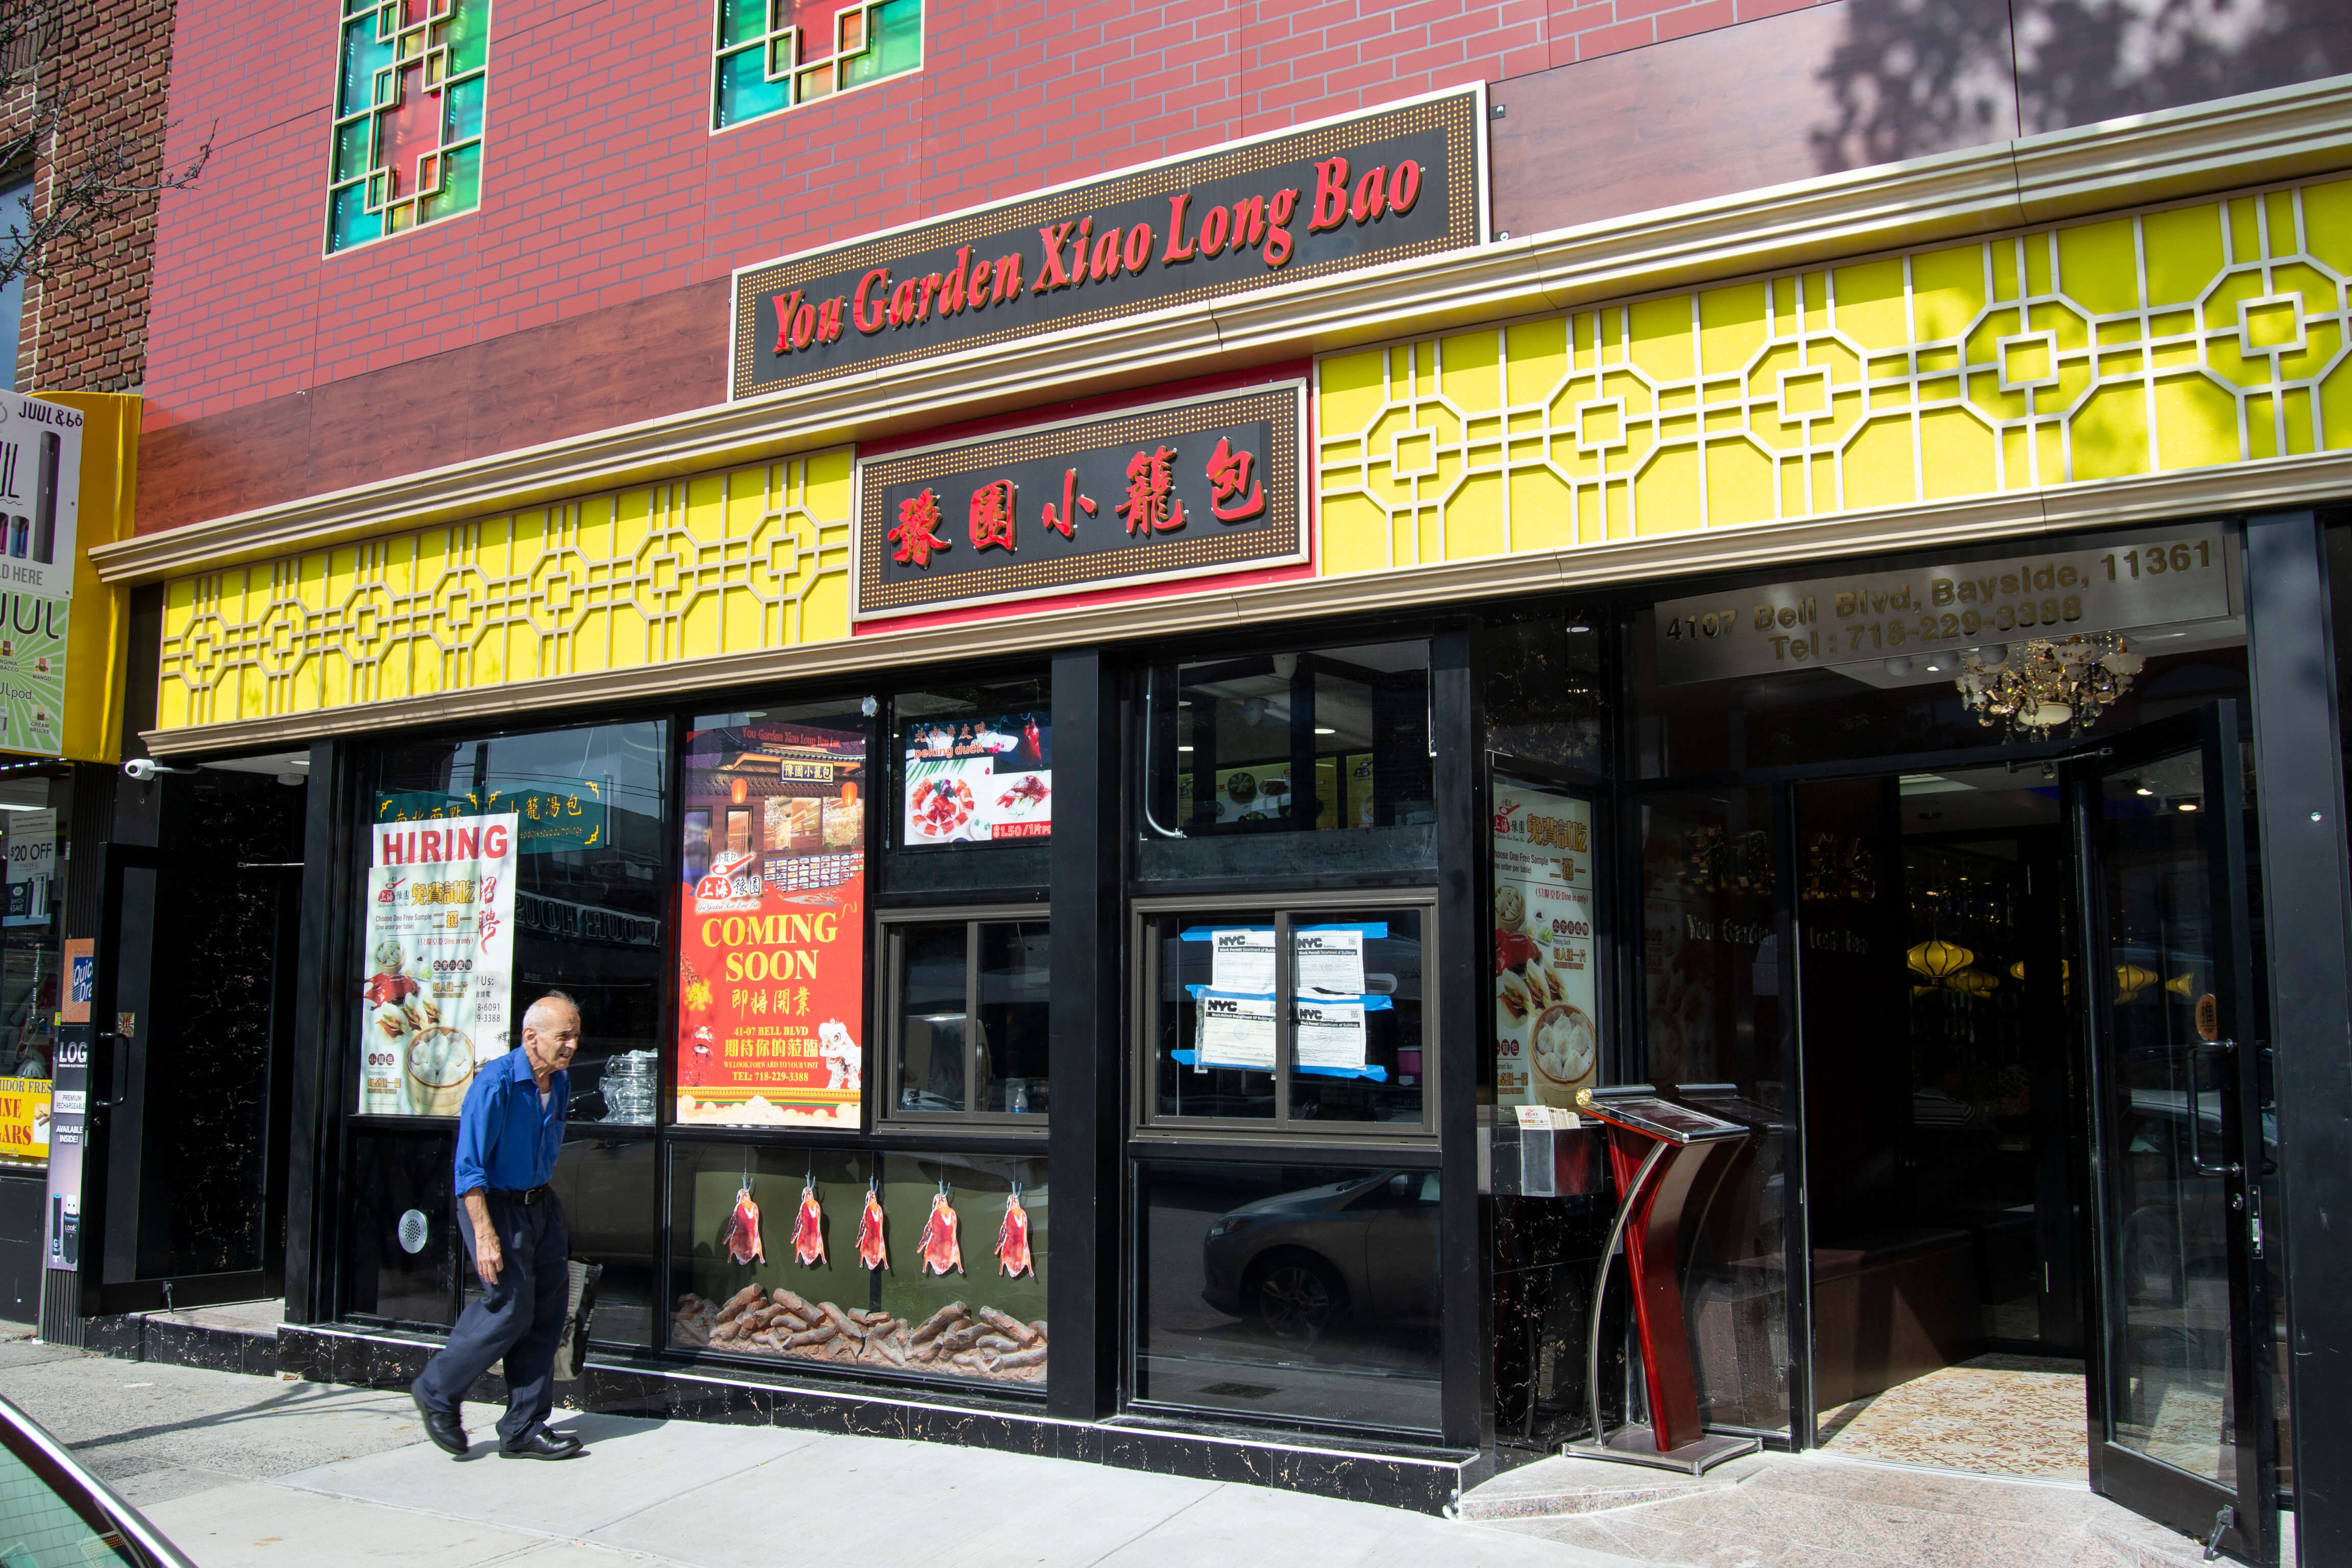 Take A Look Inside The Authentic Chinese Restaurant Opening In